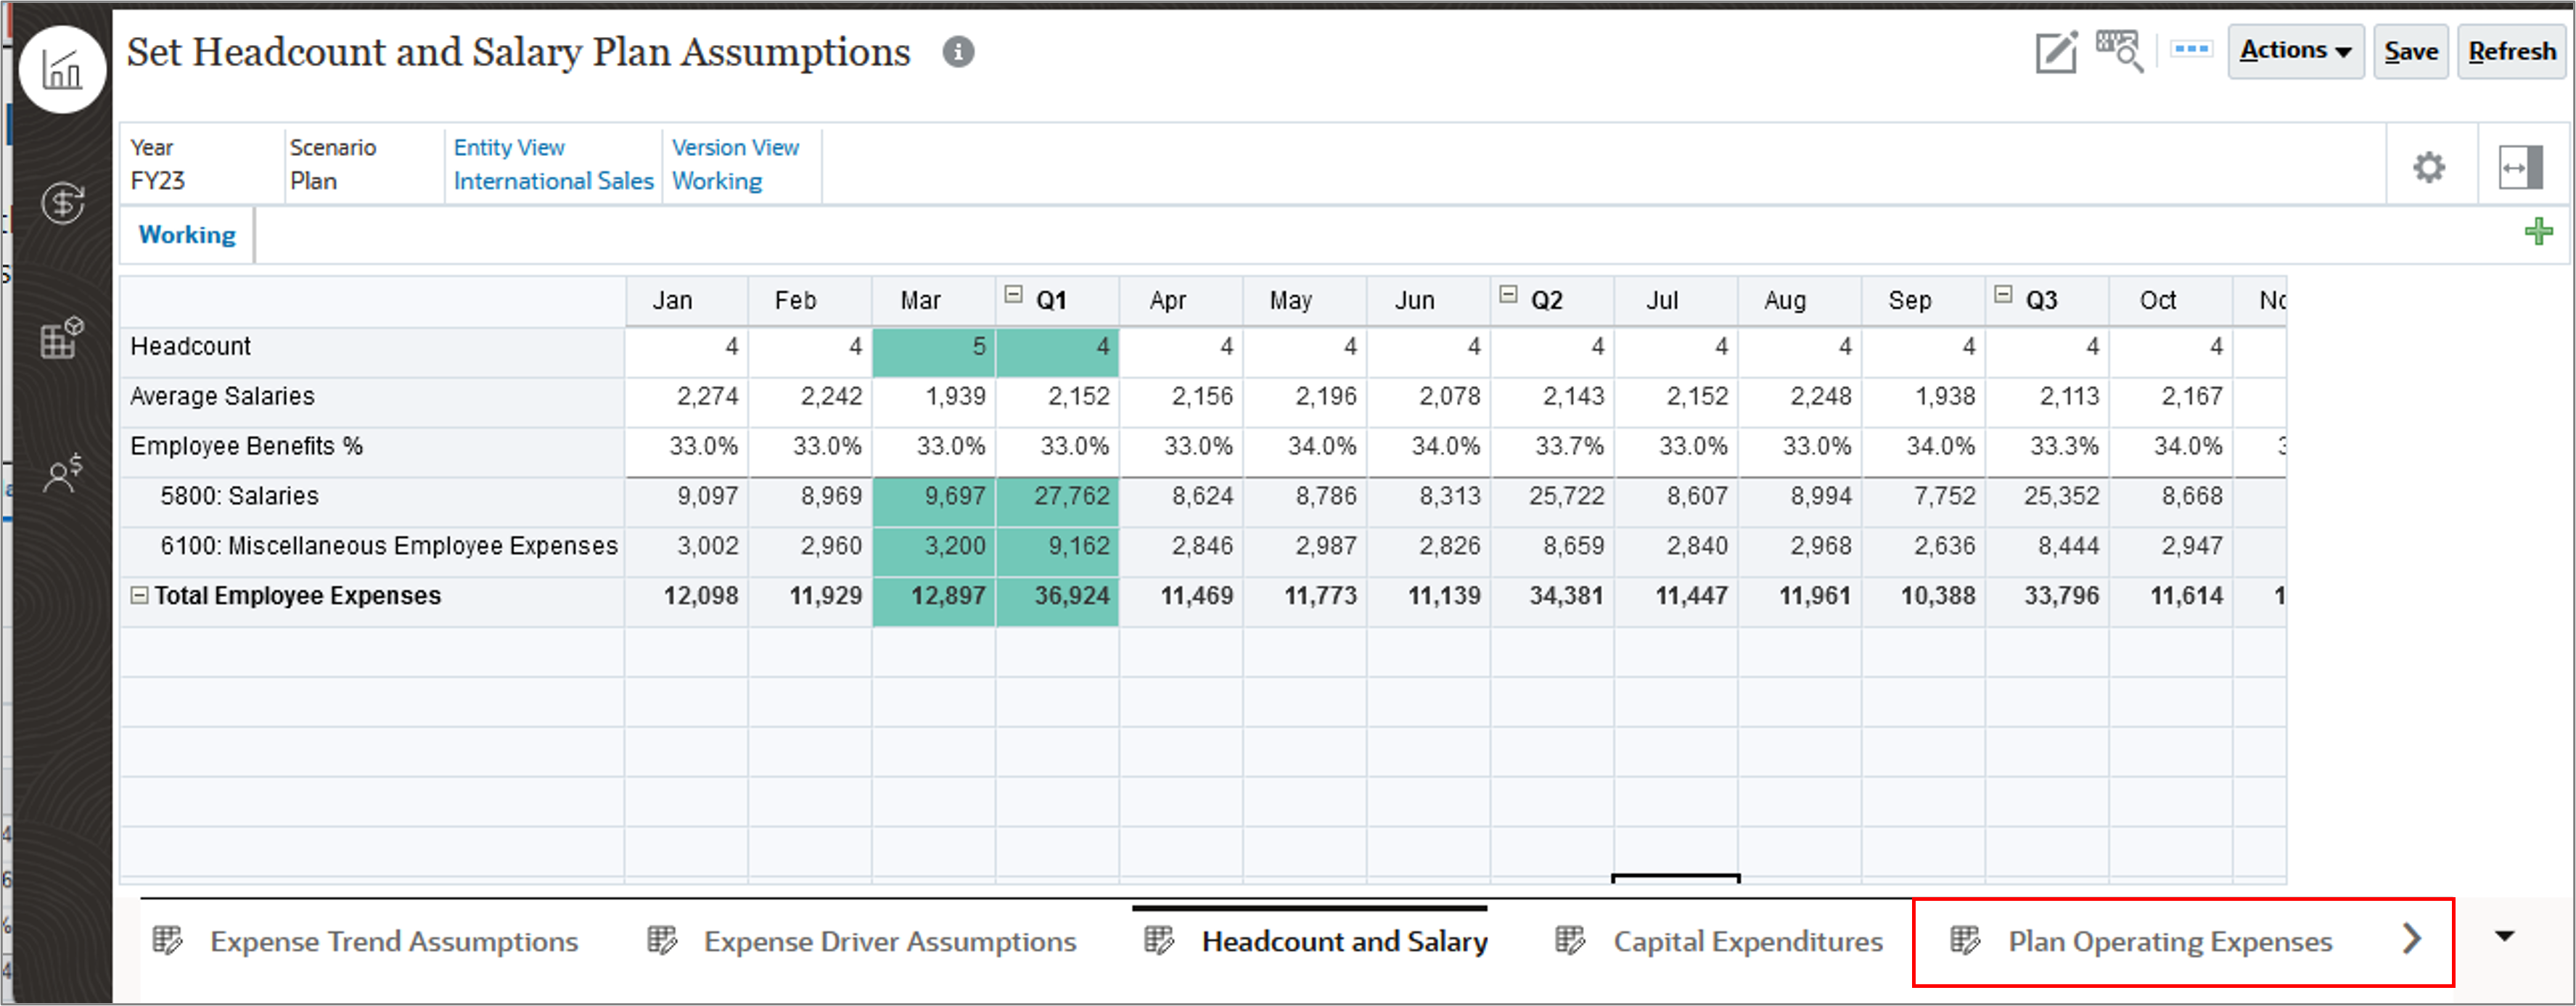 Set Headcount and Salary Plan Assumptions with Plan Operating Expenses highlighted